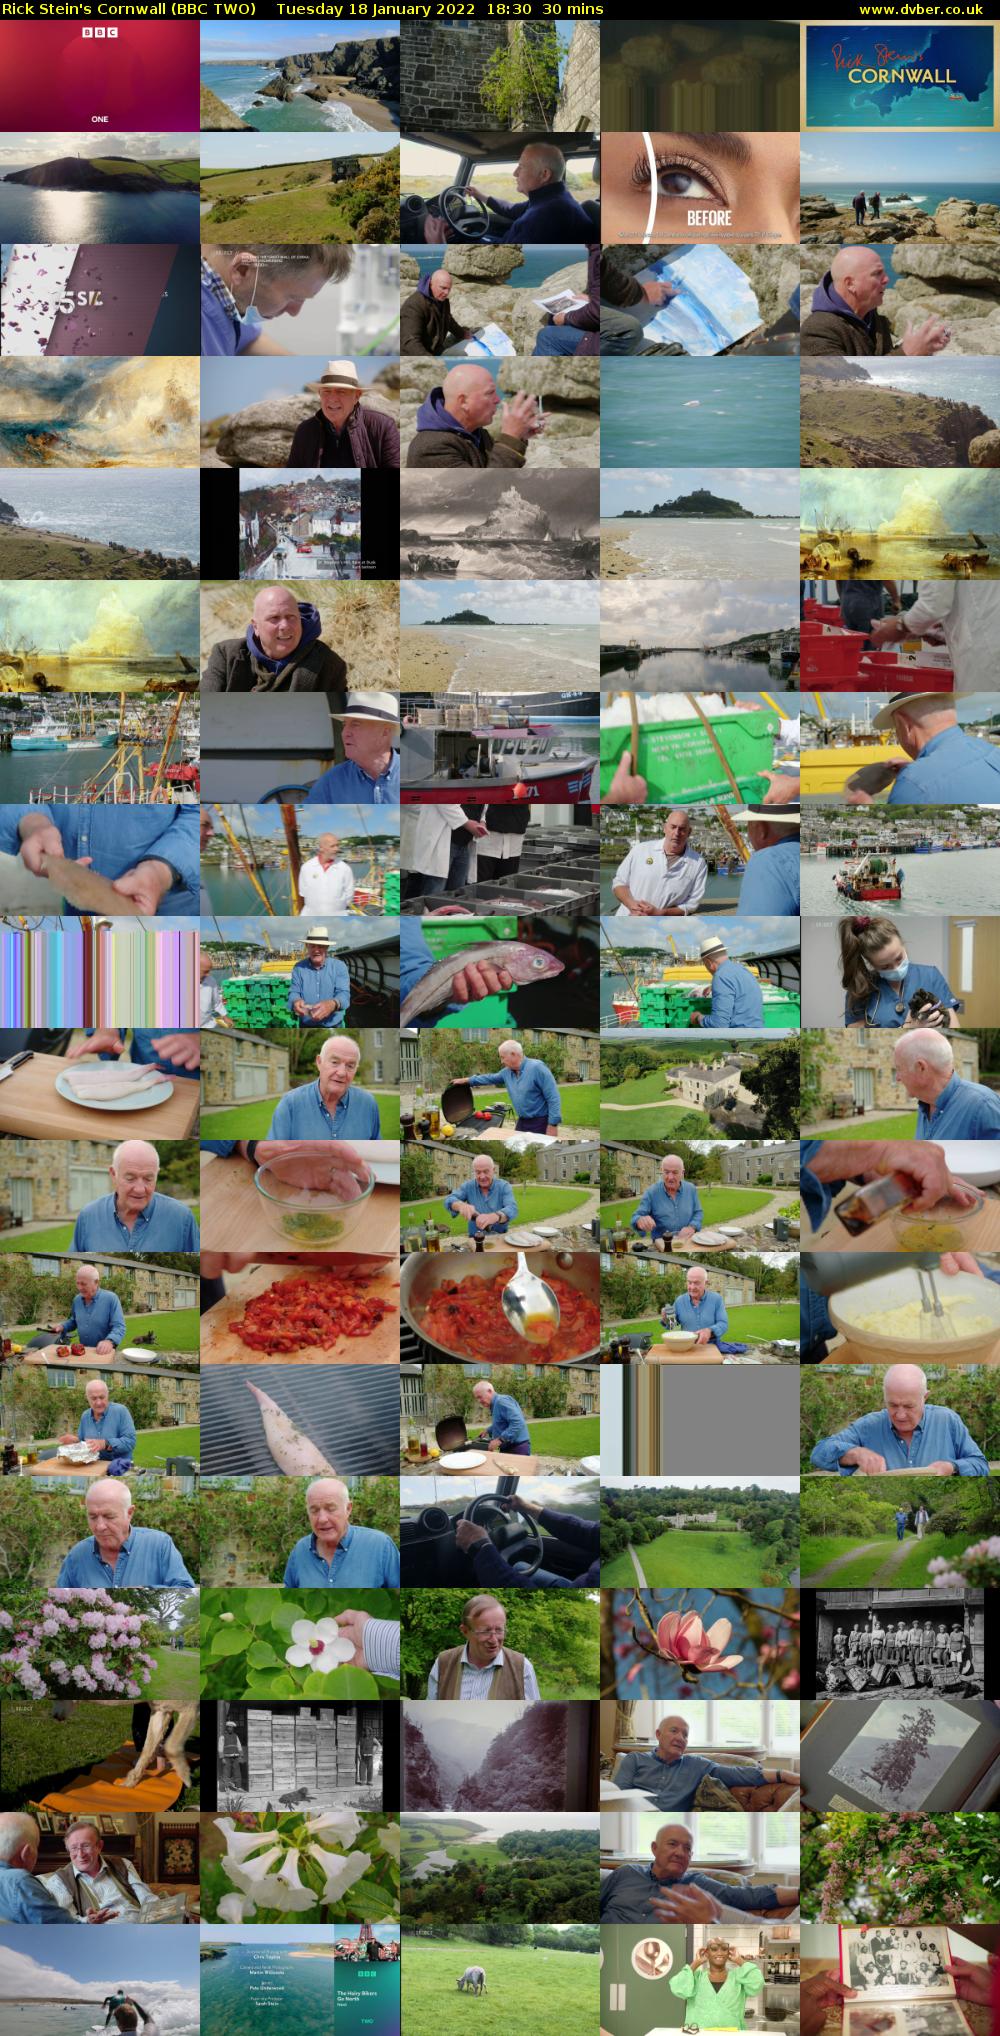 Rick Stein's Cornwall (BBC TWO) Tuesday 18 January 2022 18:30 - 19:00